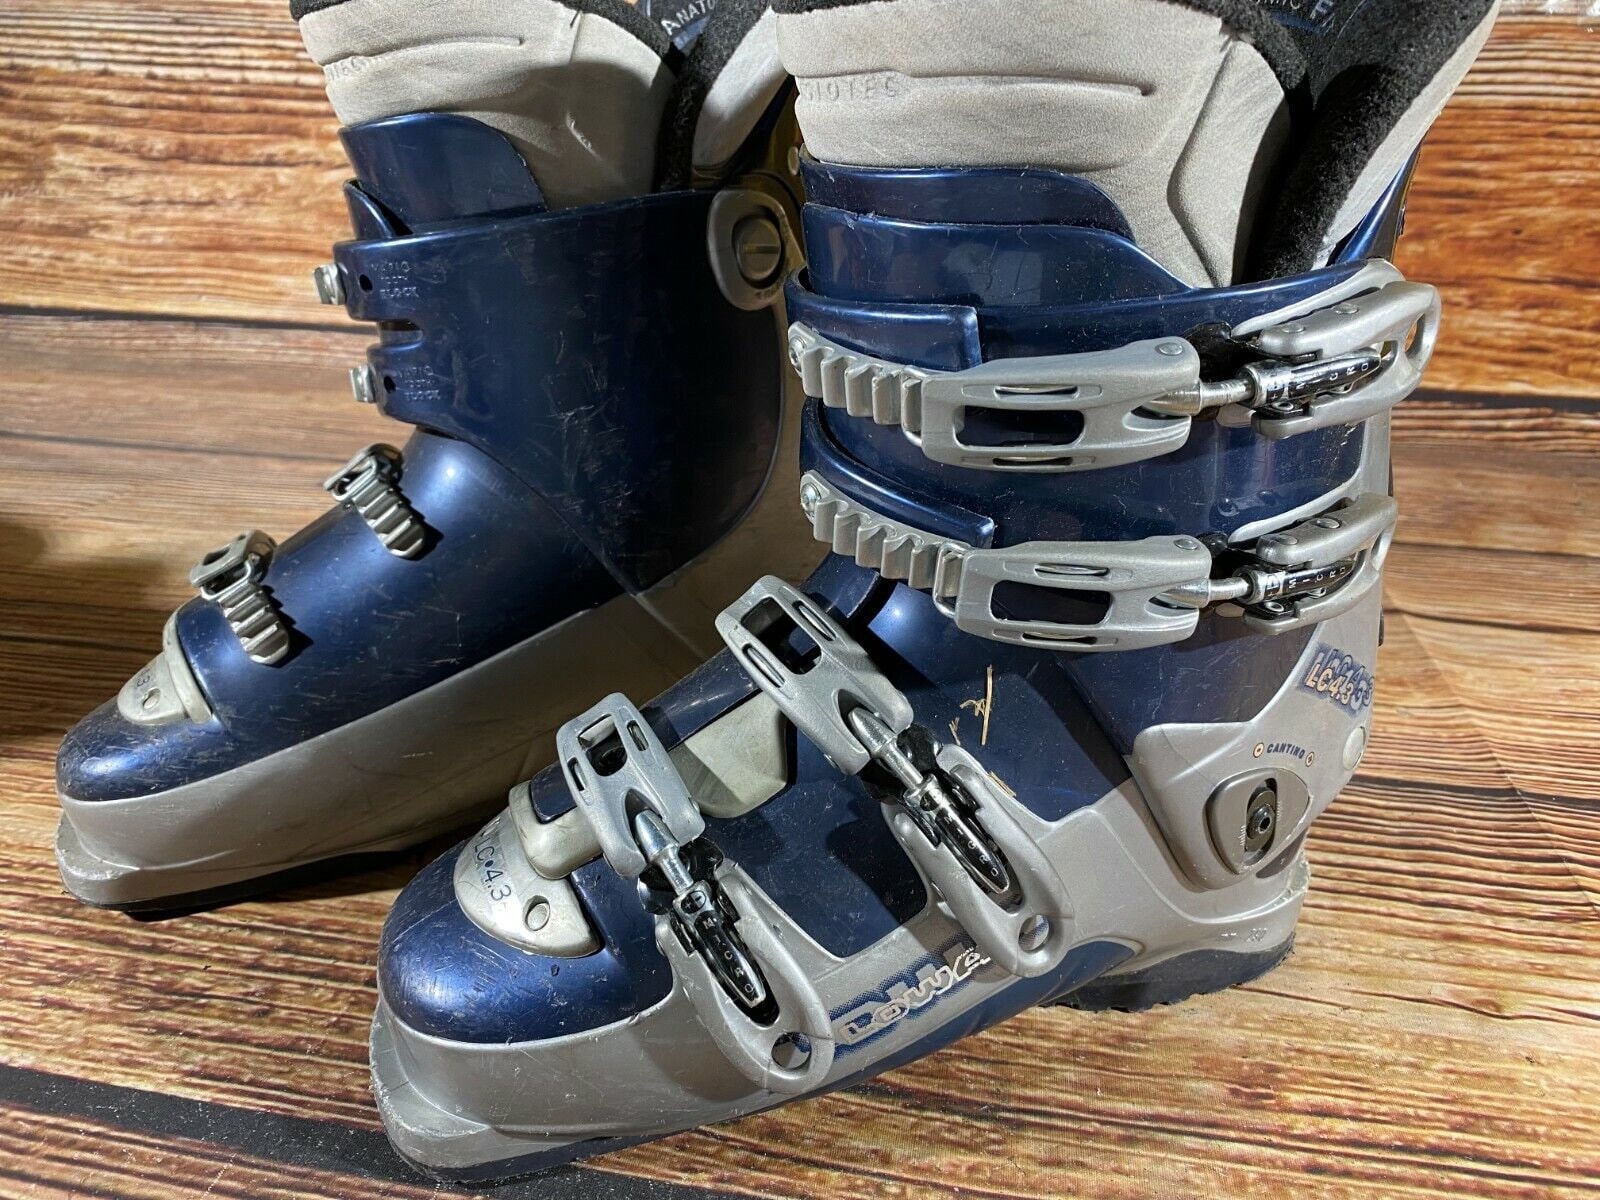 LOWA Alpine Ski Boots Size Mondo 250 Mm Outer Sole 290 Mm - Etsy Israel